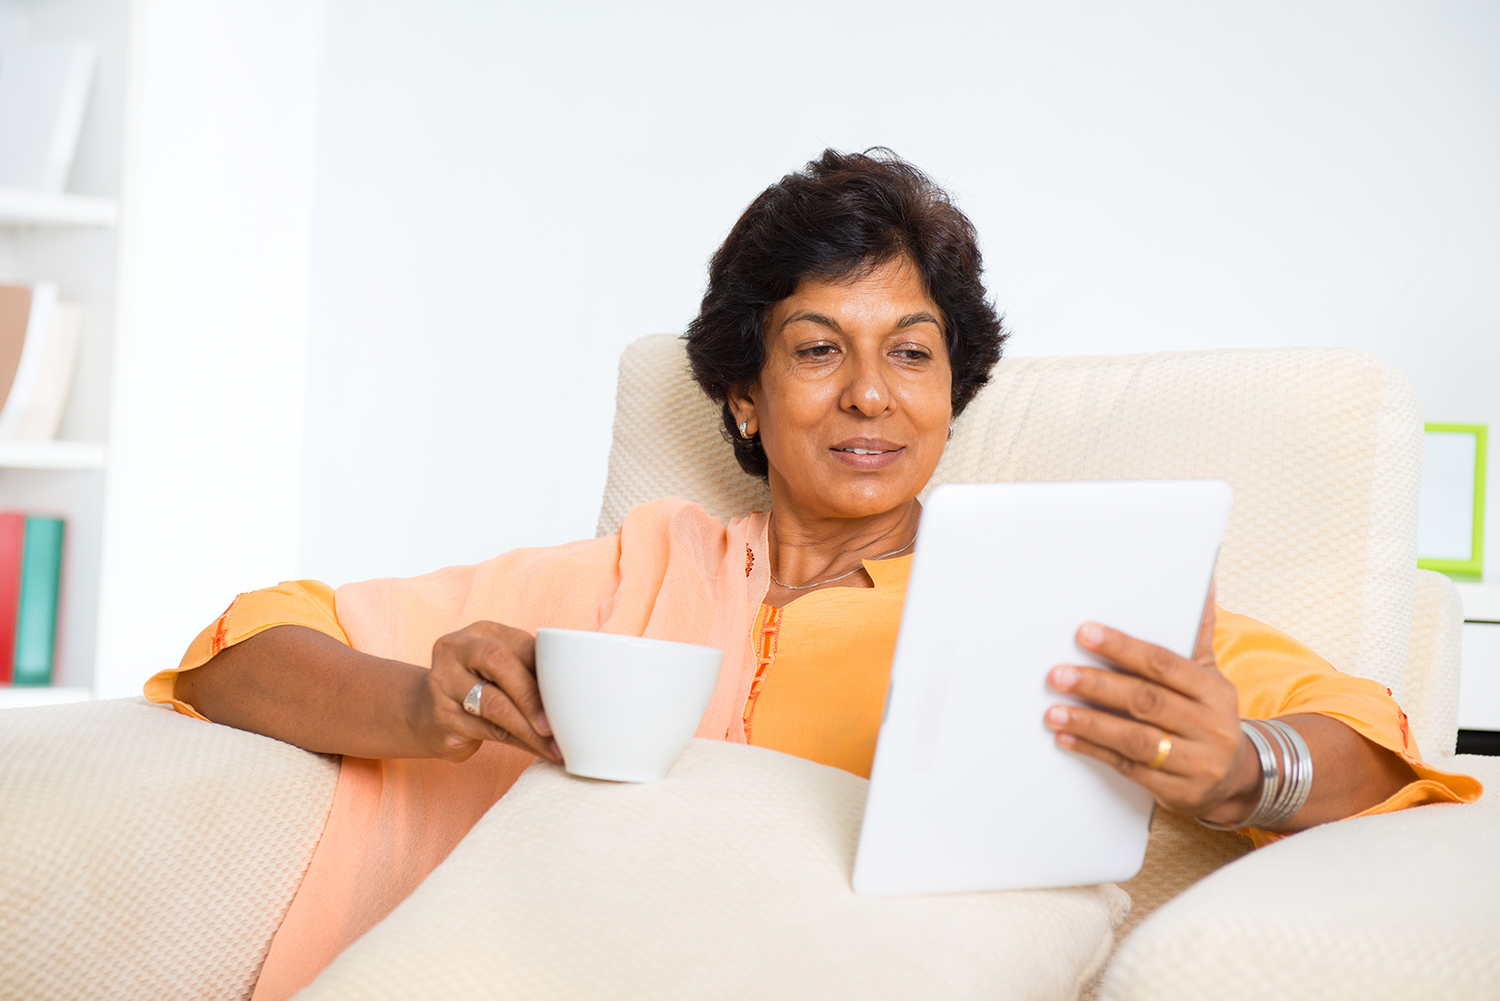 Mature 50s Indian woman drinking coffee / tea and using digital computer tablet at home